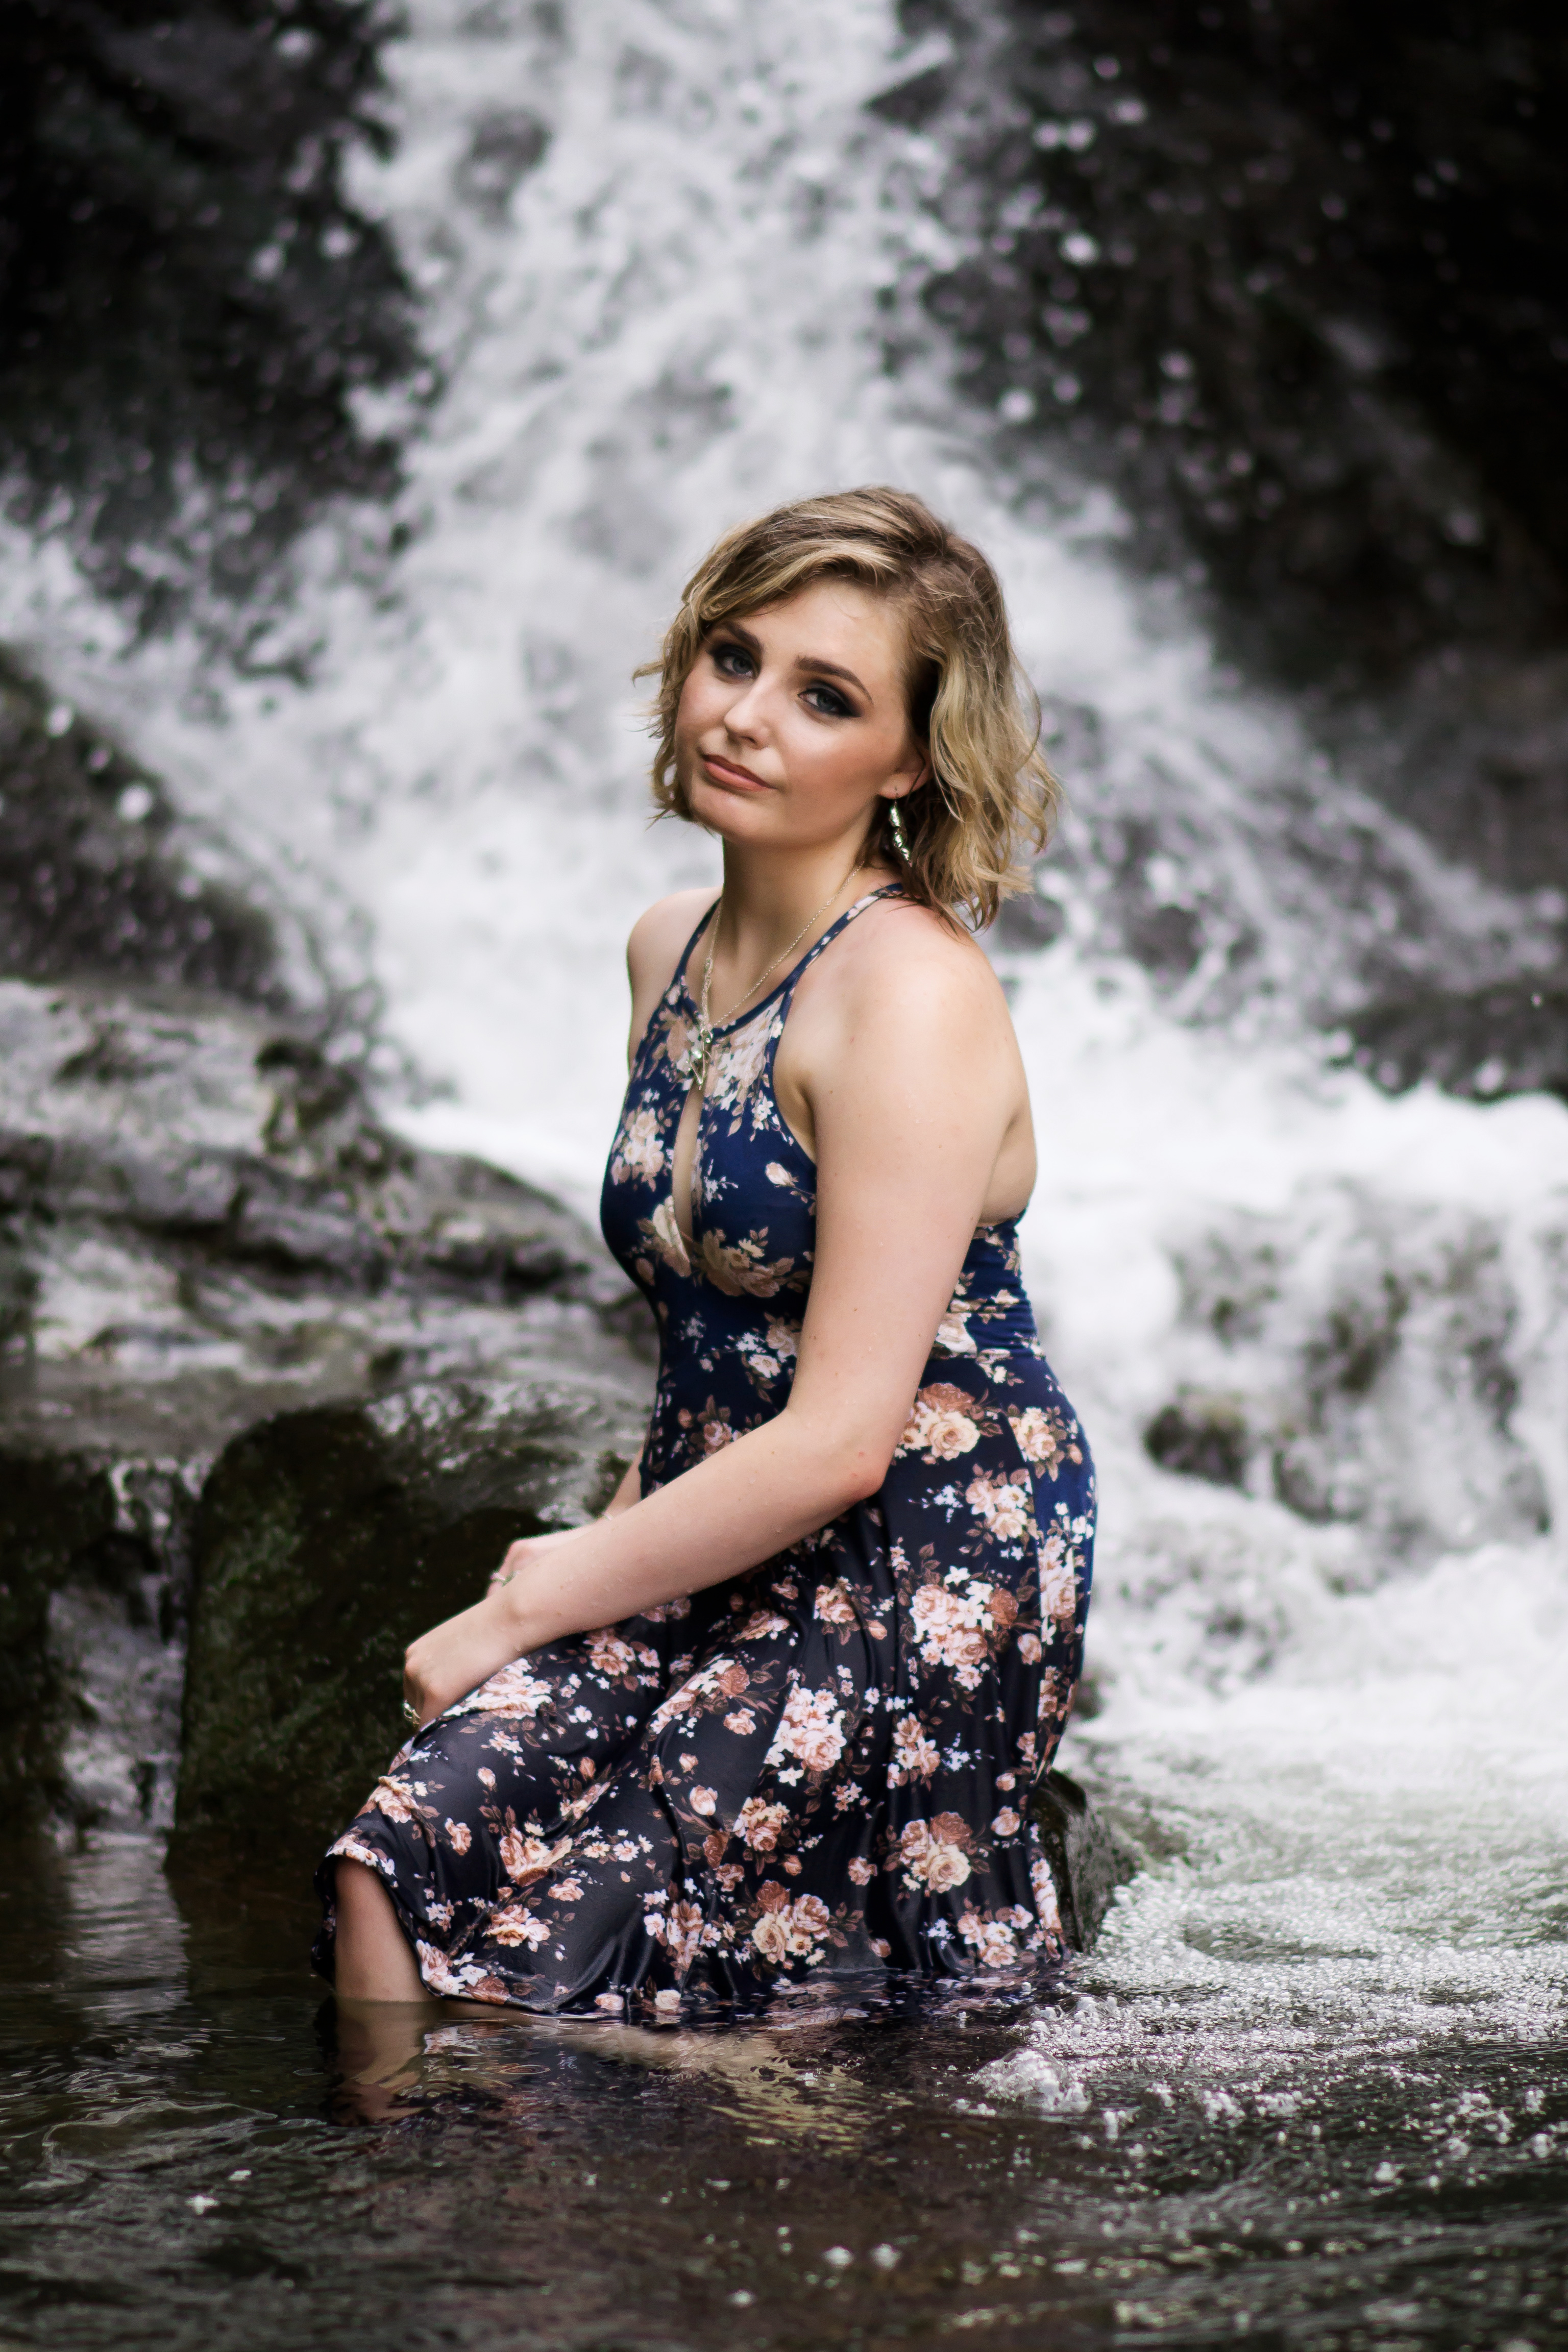 Jordan wanted an out of the box location that would standout for her senior session. We ended up at a local waterfall and she jumped right in for some memorable photos.